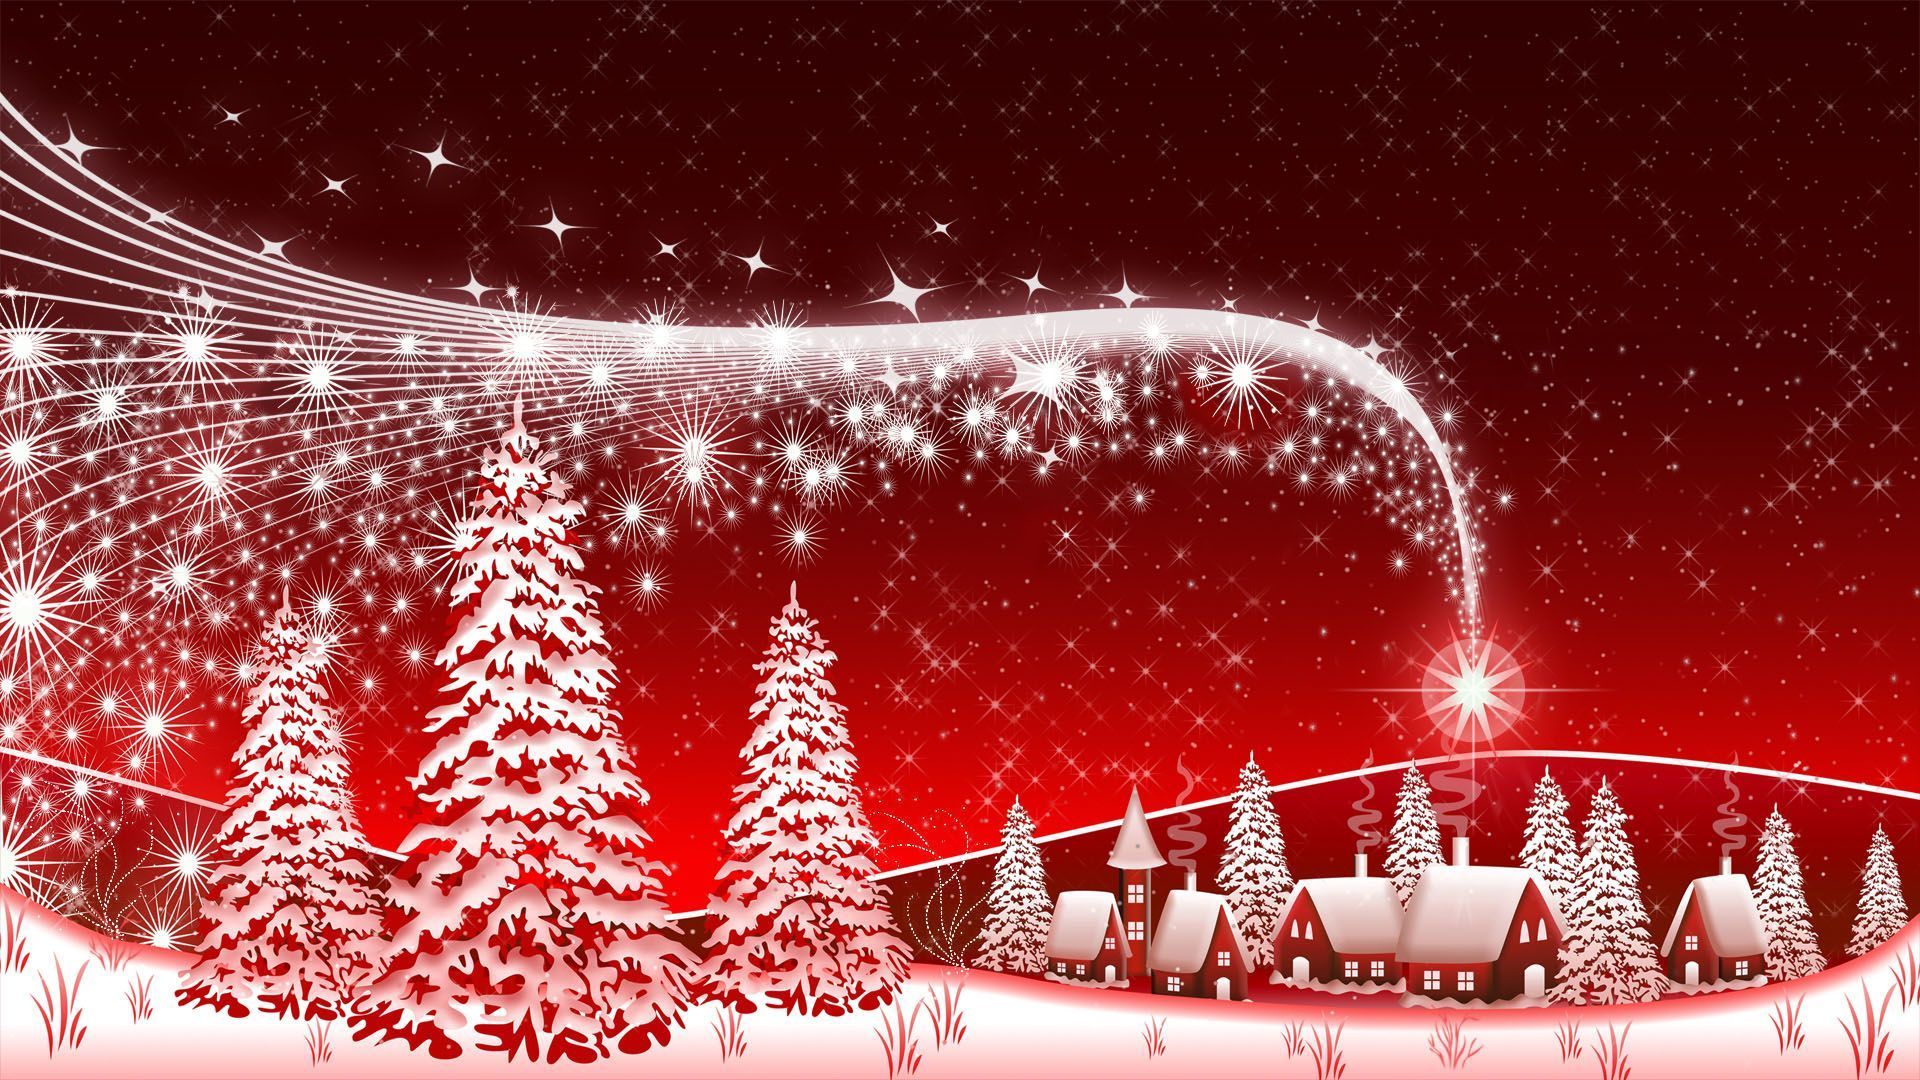 Winter Christmas Wallpaper High Quality Resolution Free Download > SubWallpaper